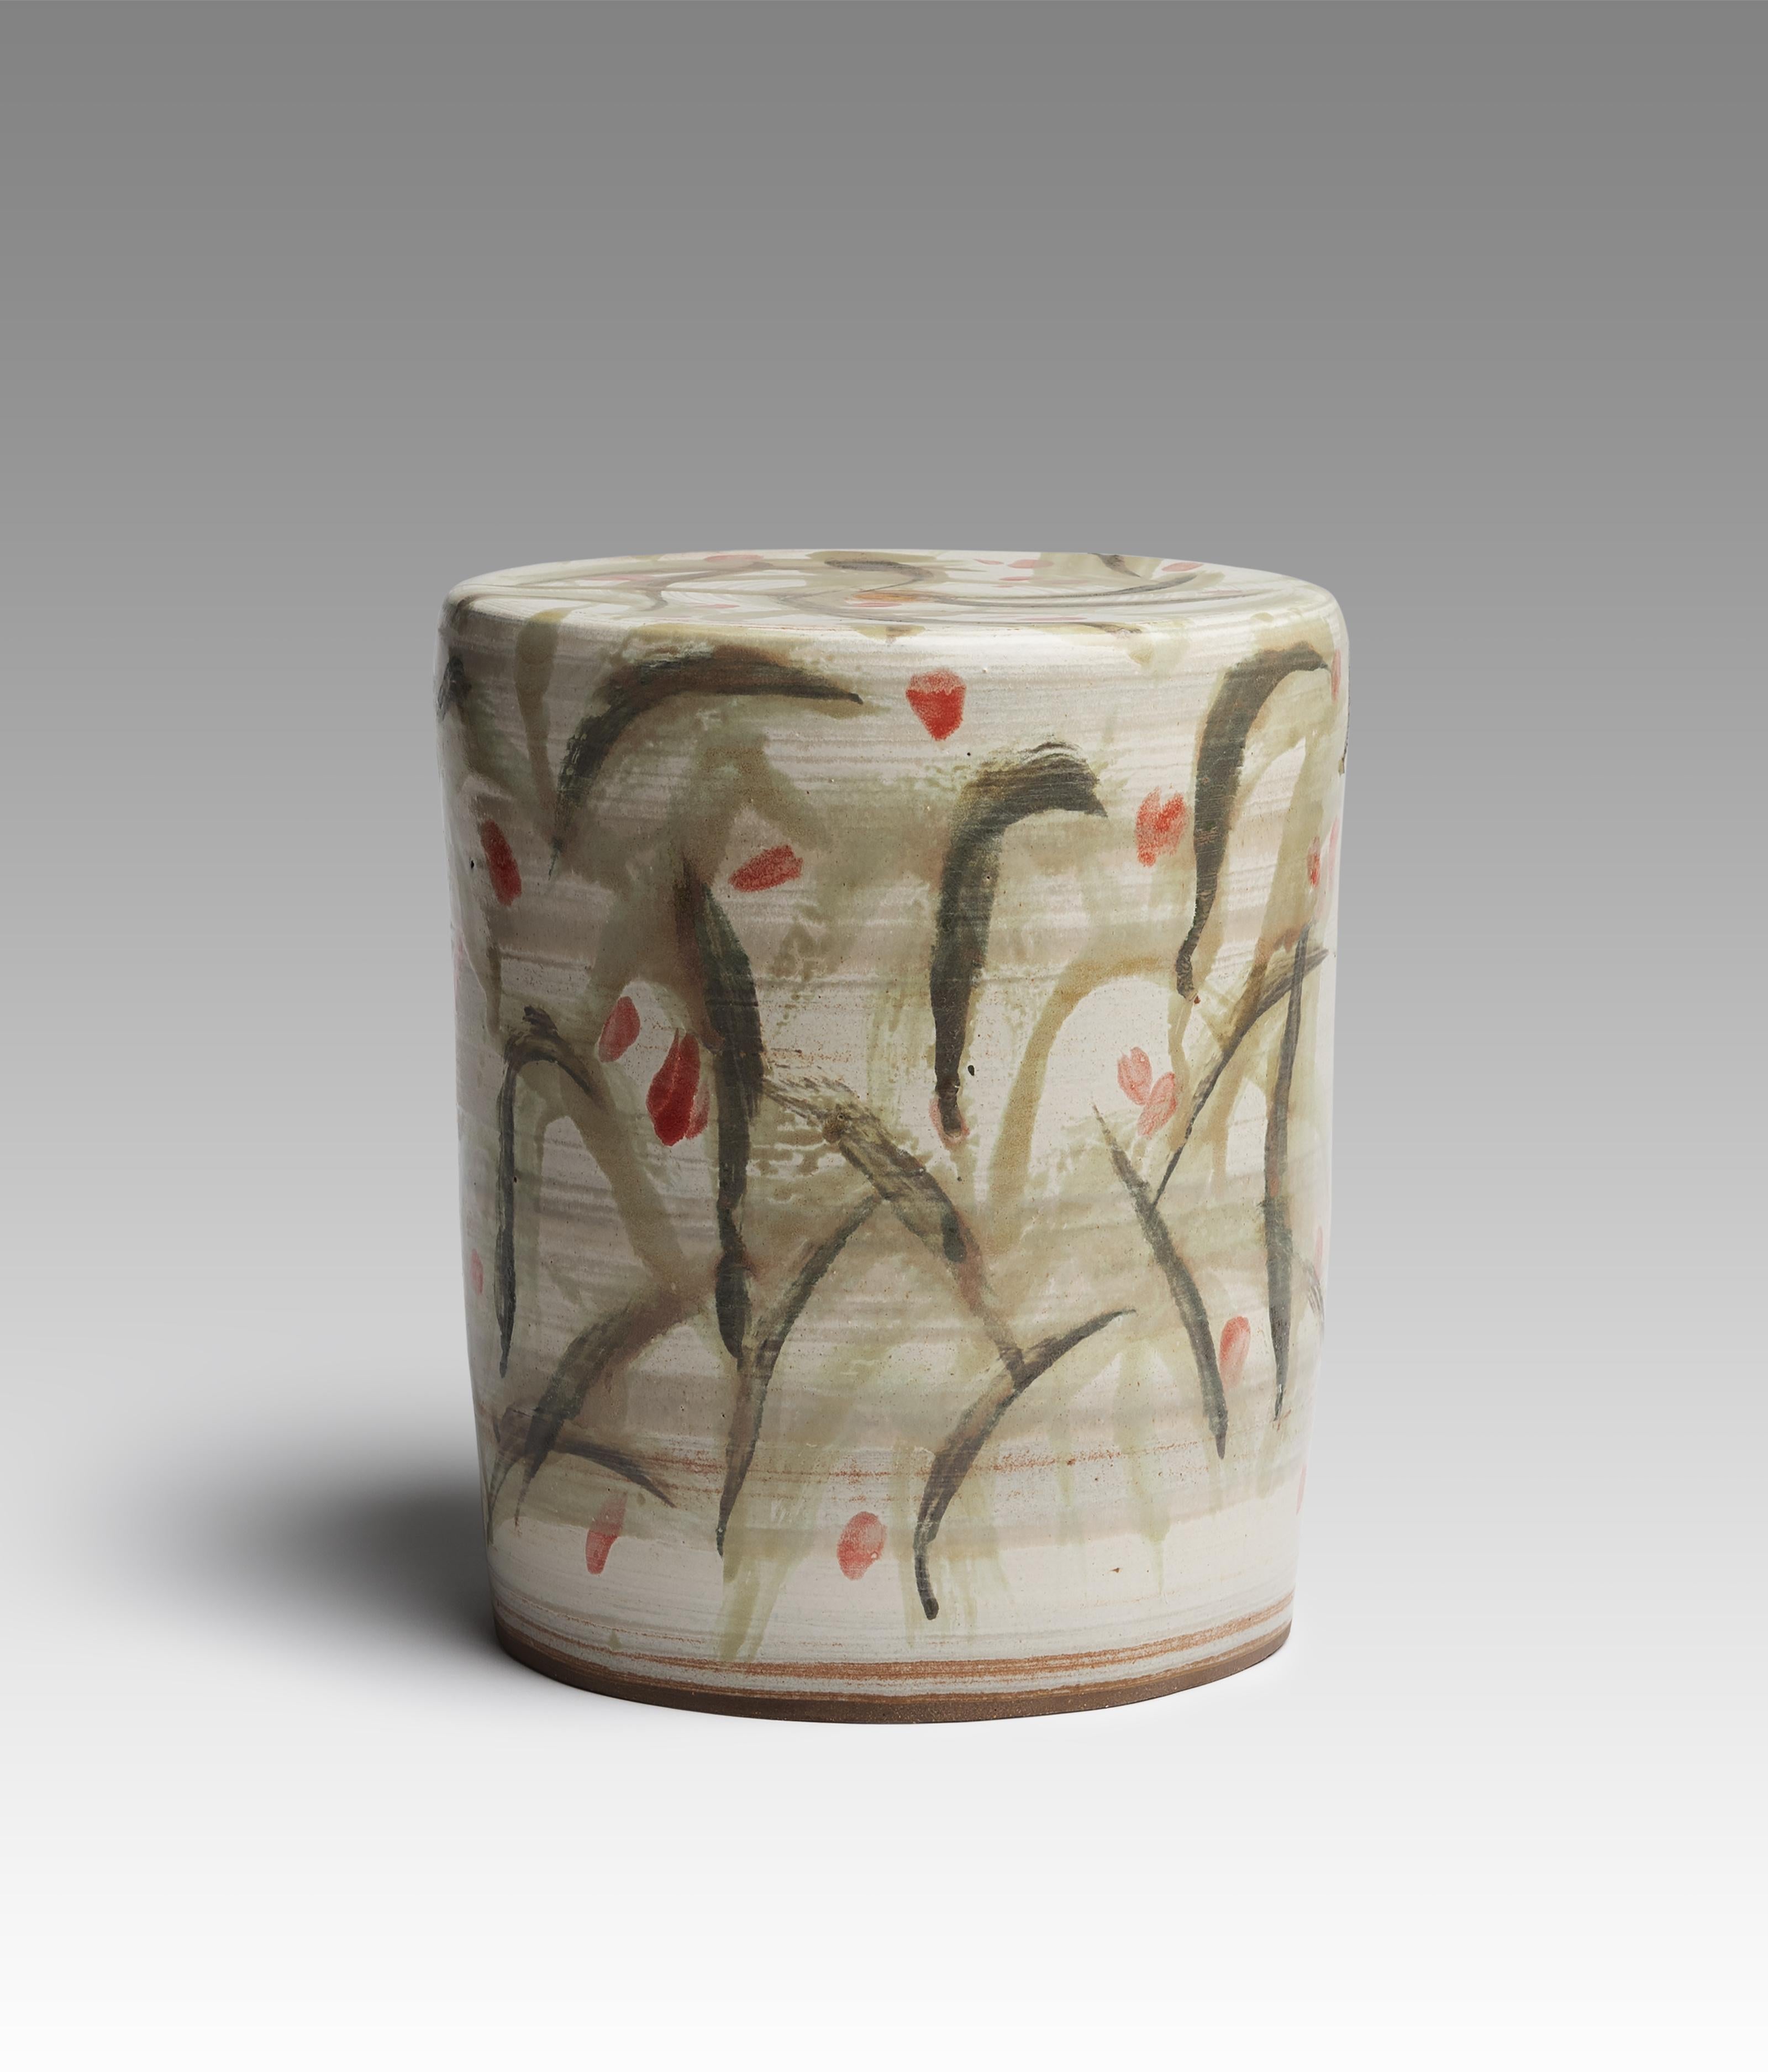 Functional and decorative stoneware object, crafted by pinching and coiling. 
The ceramic surface is applied either with a brush or by pouring. 
Each piece of this collection is unique.
This Functional and decorative object is served as both a